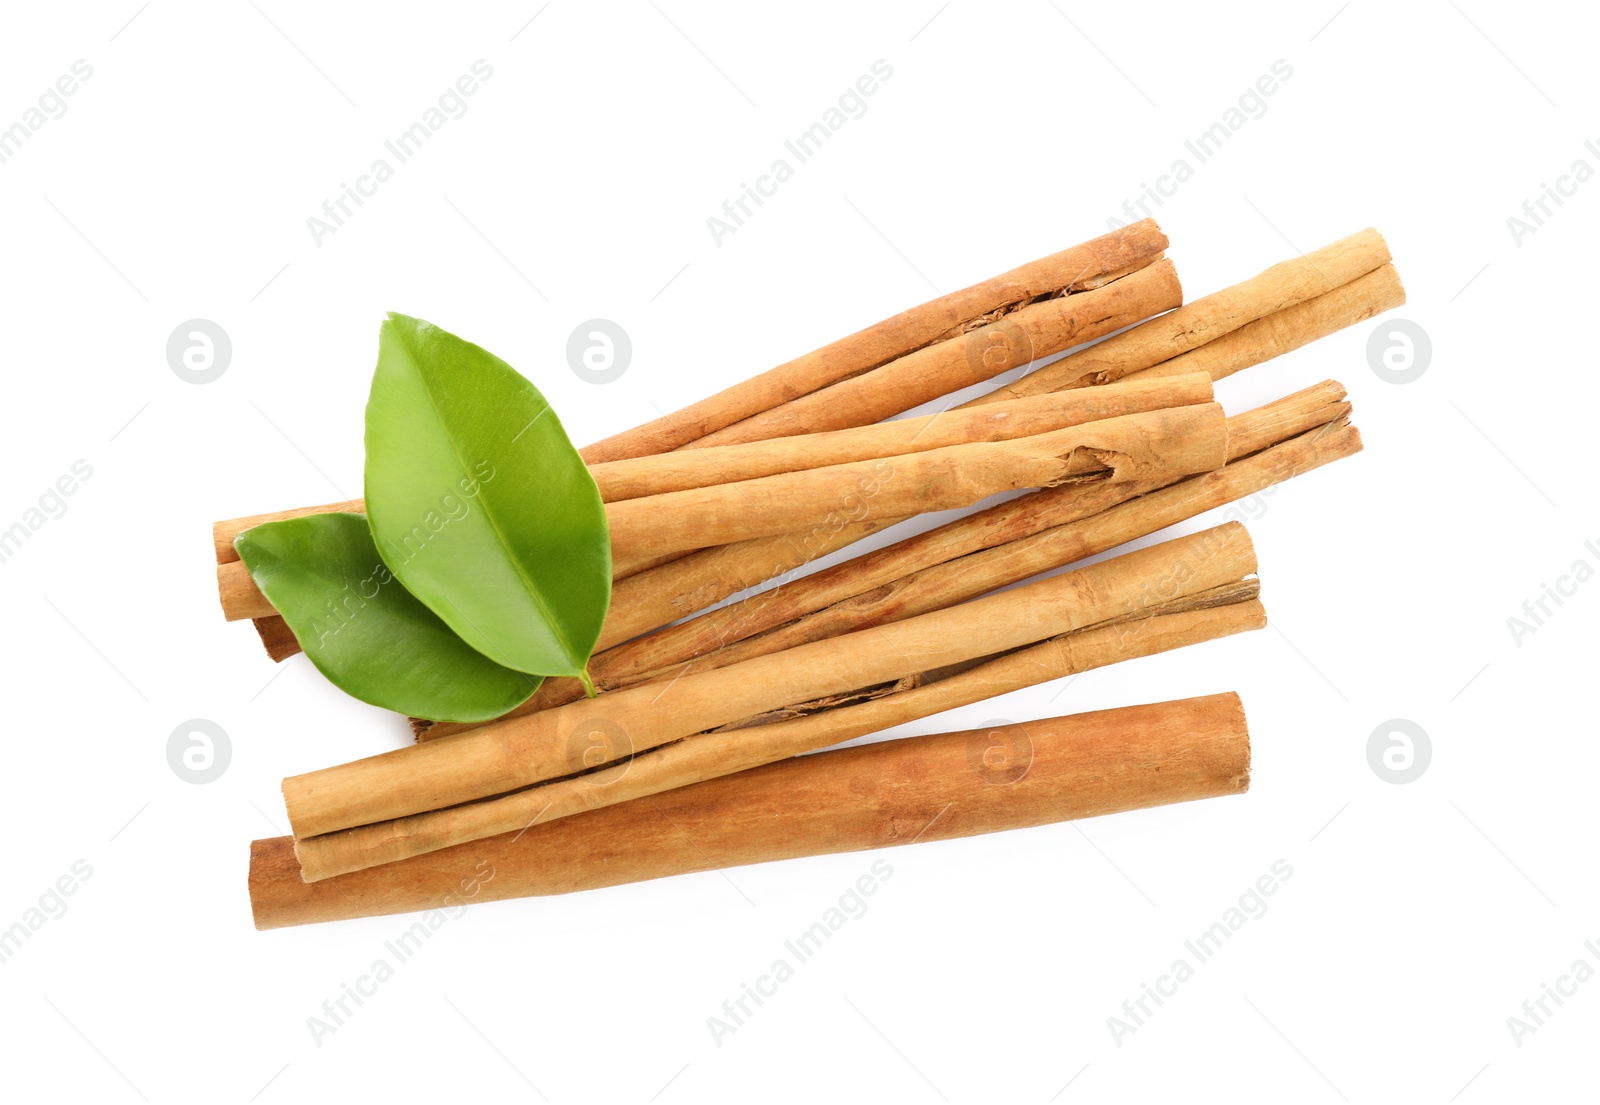 Photo of Aromatic dry cinnamon sticks and green leaves on white background, top view